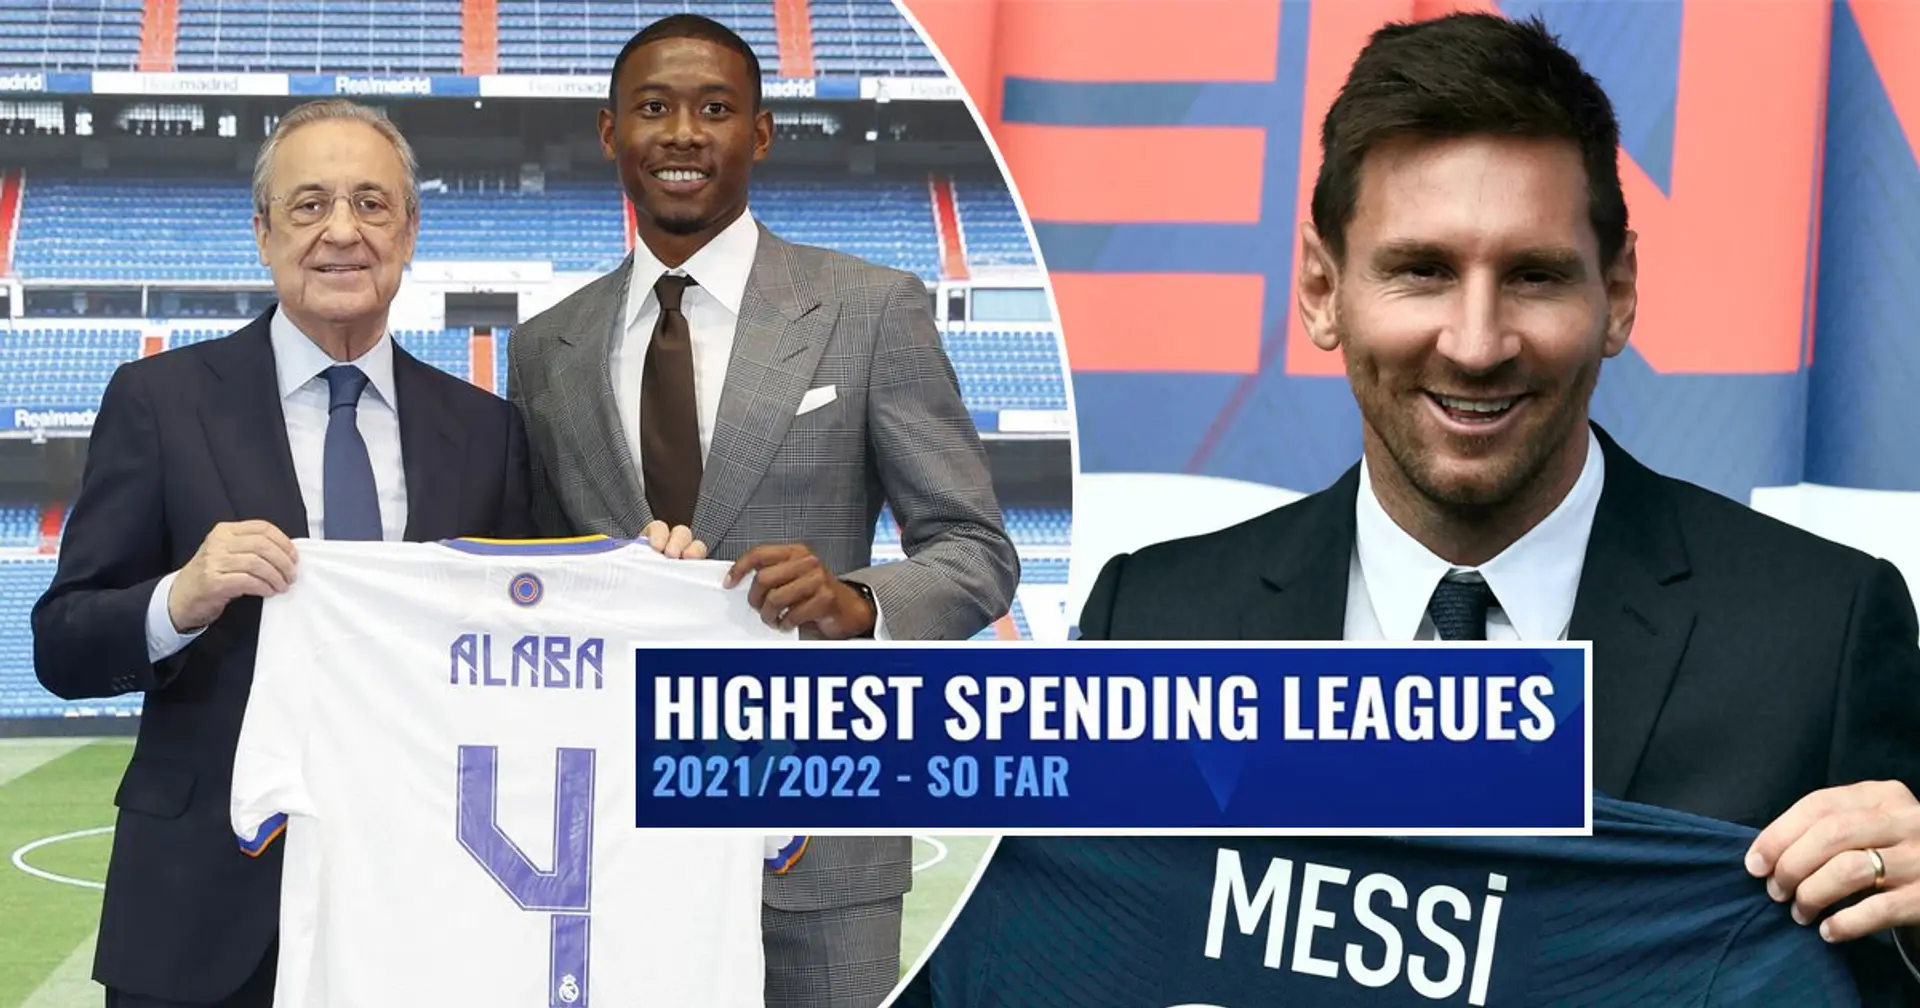 Revealed: Where Ligue 1 stands among world's highest spending leagues this summer